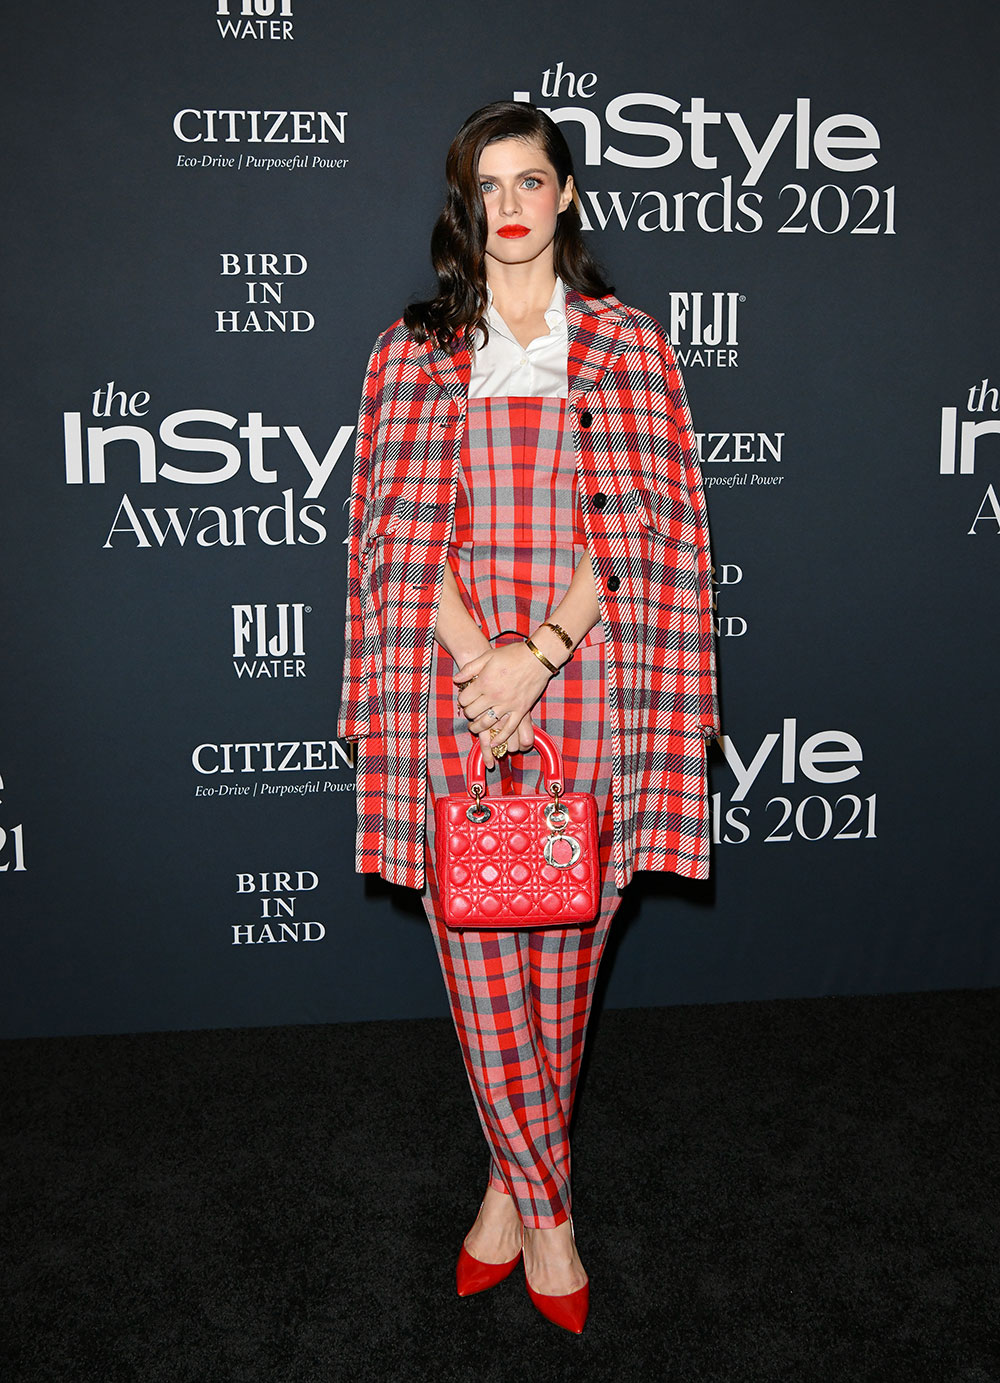 Alexandra-Daddario-attends-the-6th-Annual-InStyle-Awards-in-Christian-Dior-Fall-2021-getty